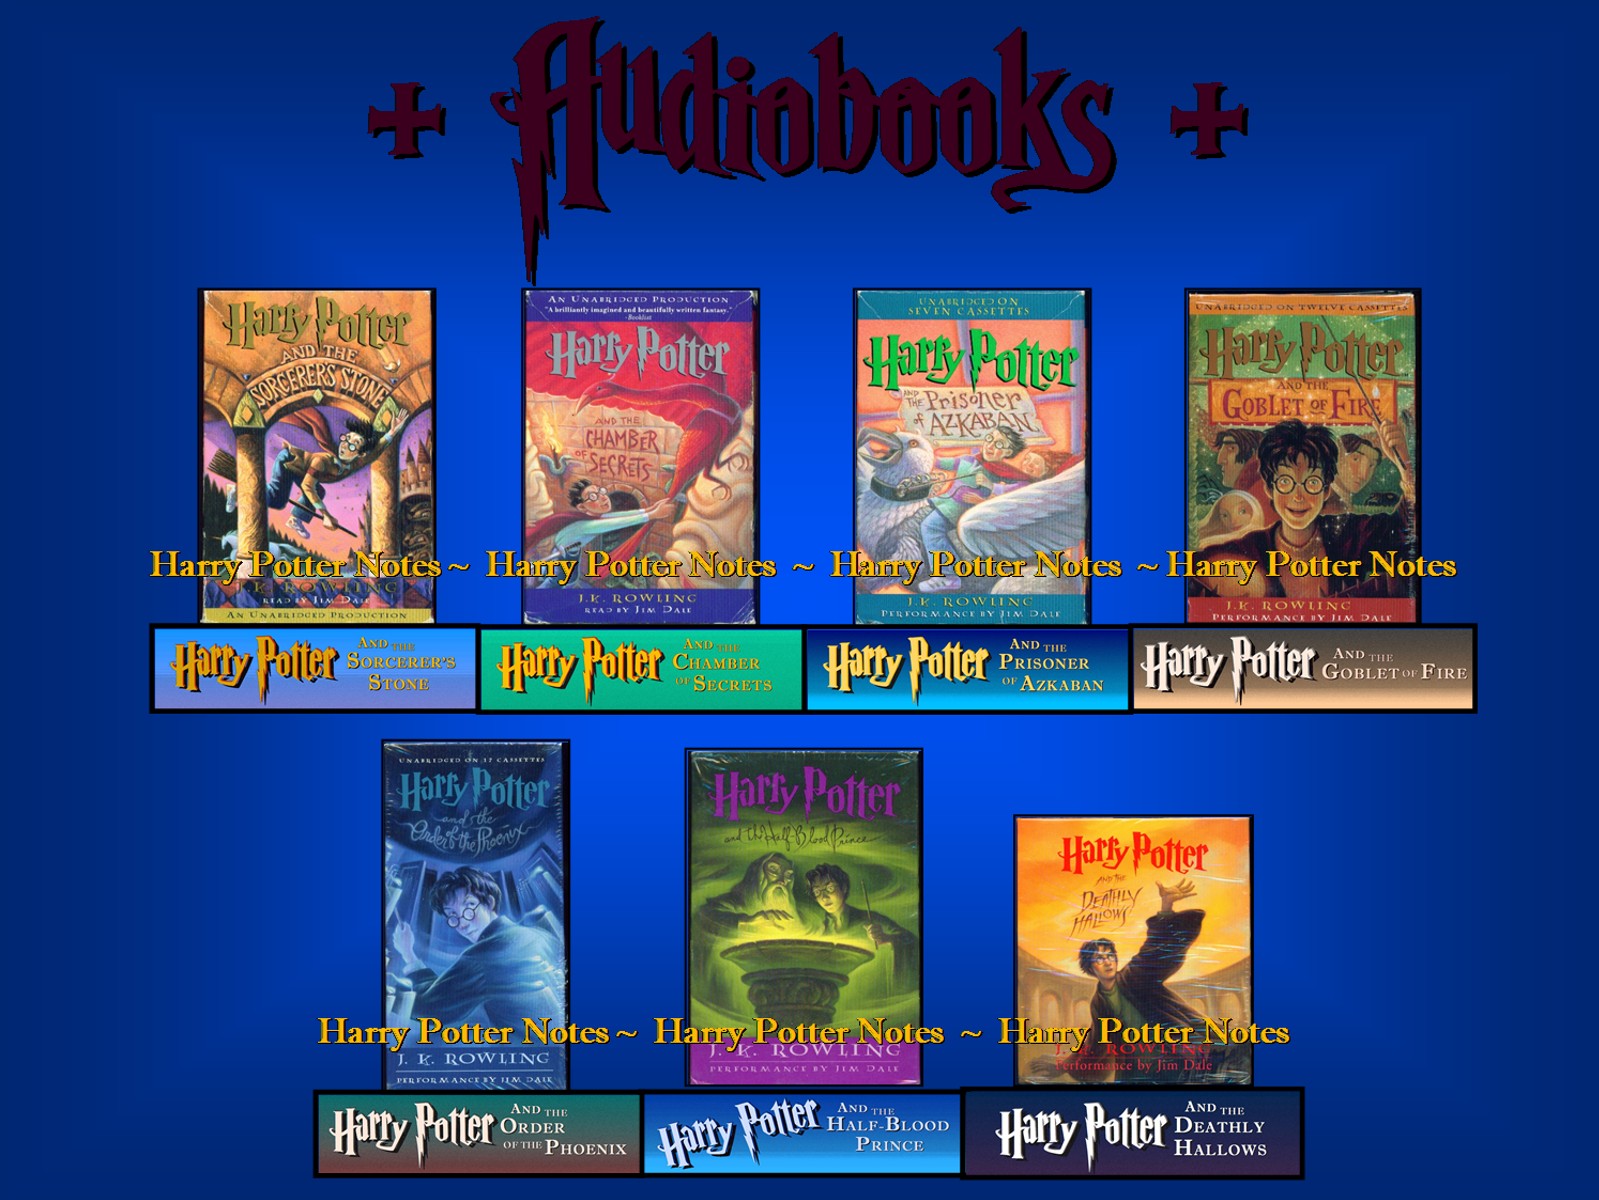 Are there different editions of the Harry Potter audiobooks? 2